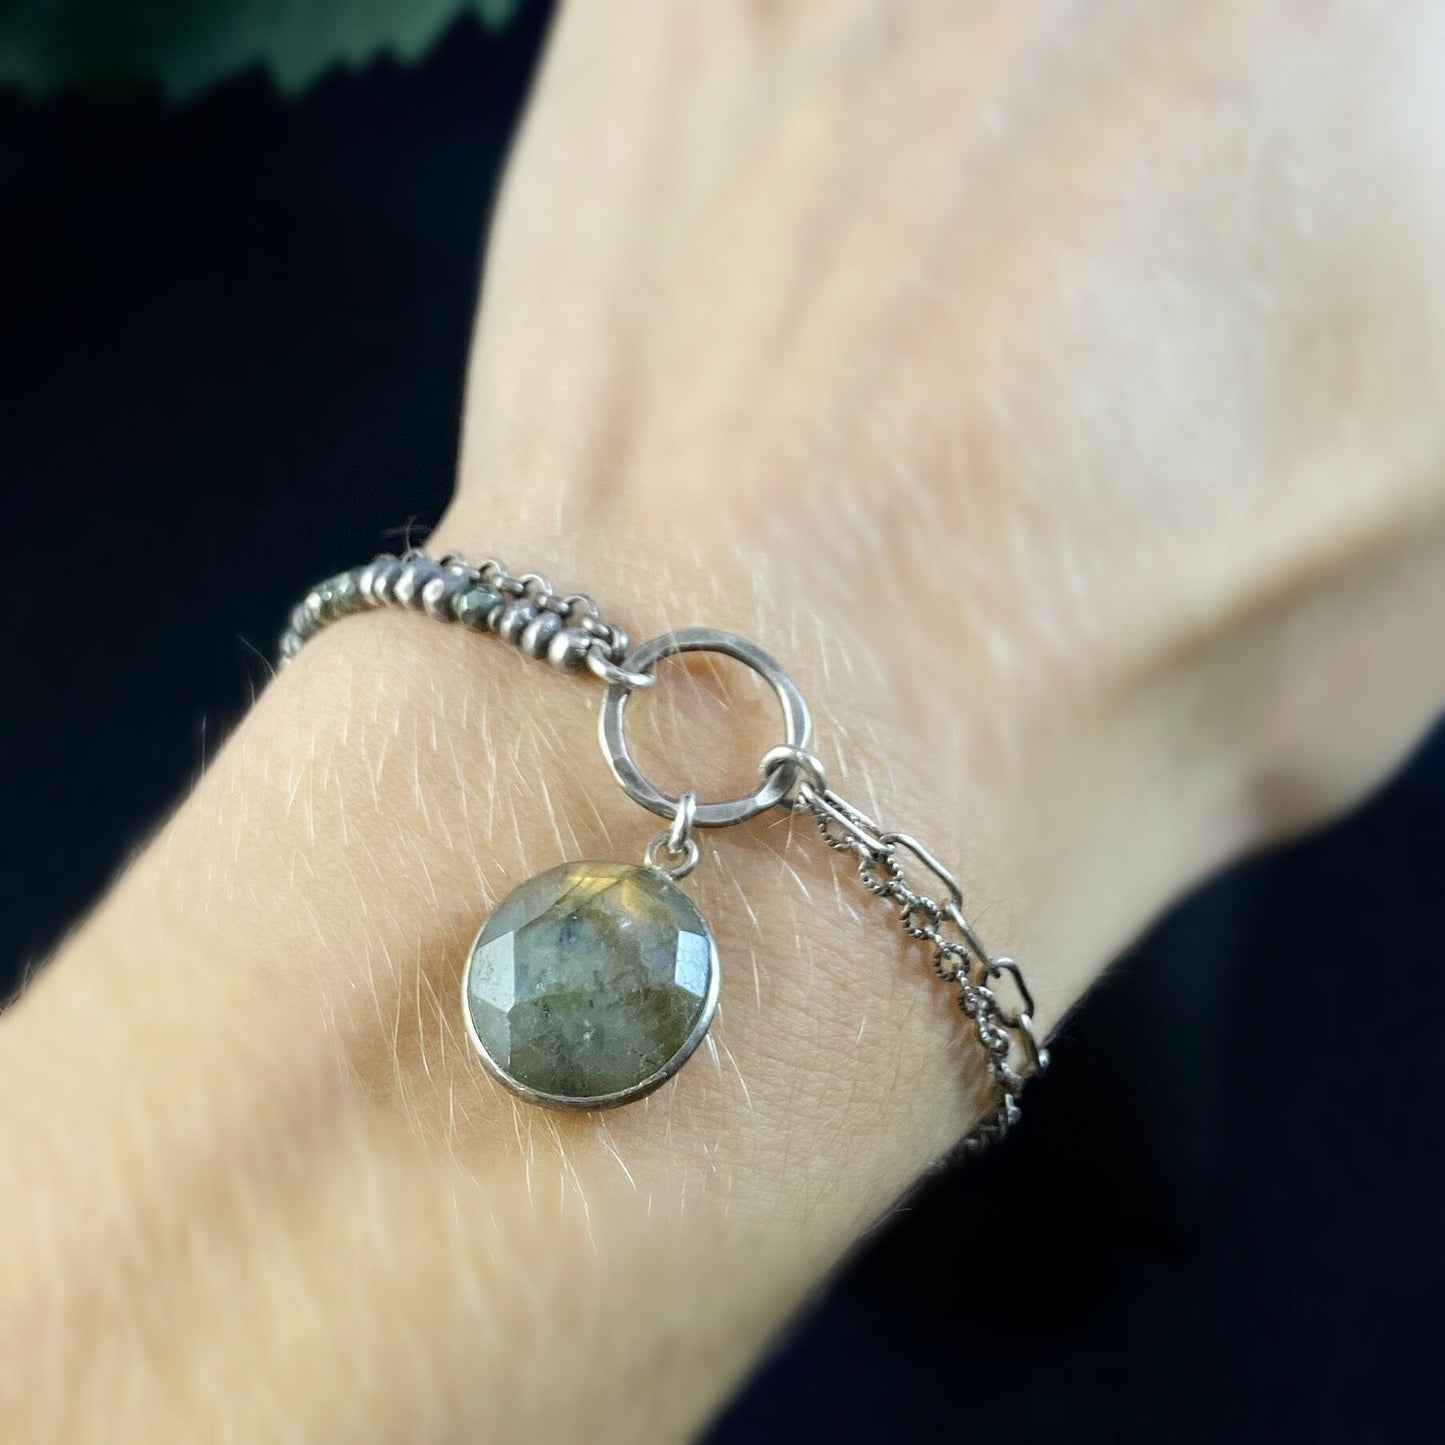 Handmade Chain Link Beaded Bracelet with Labradorite, Made in USA